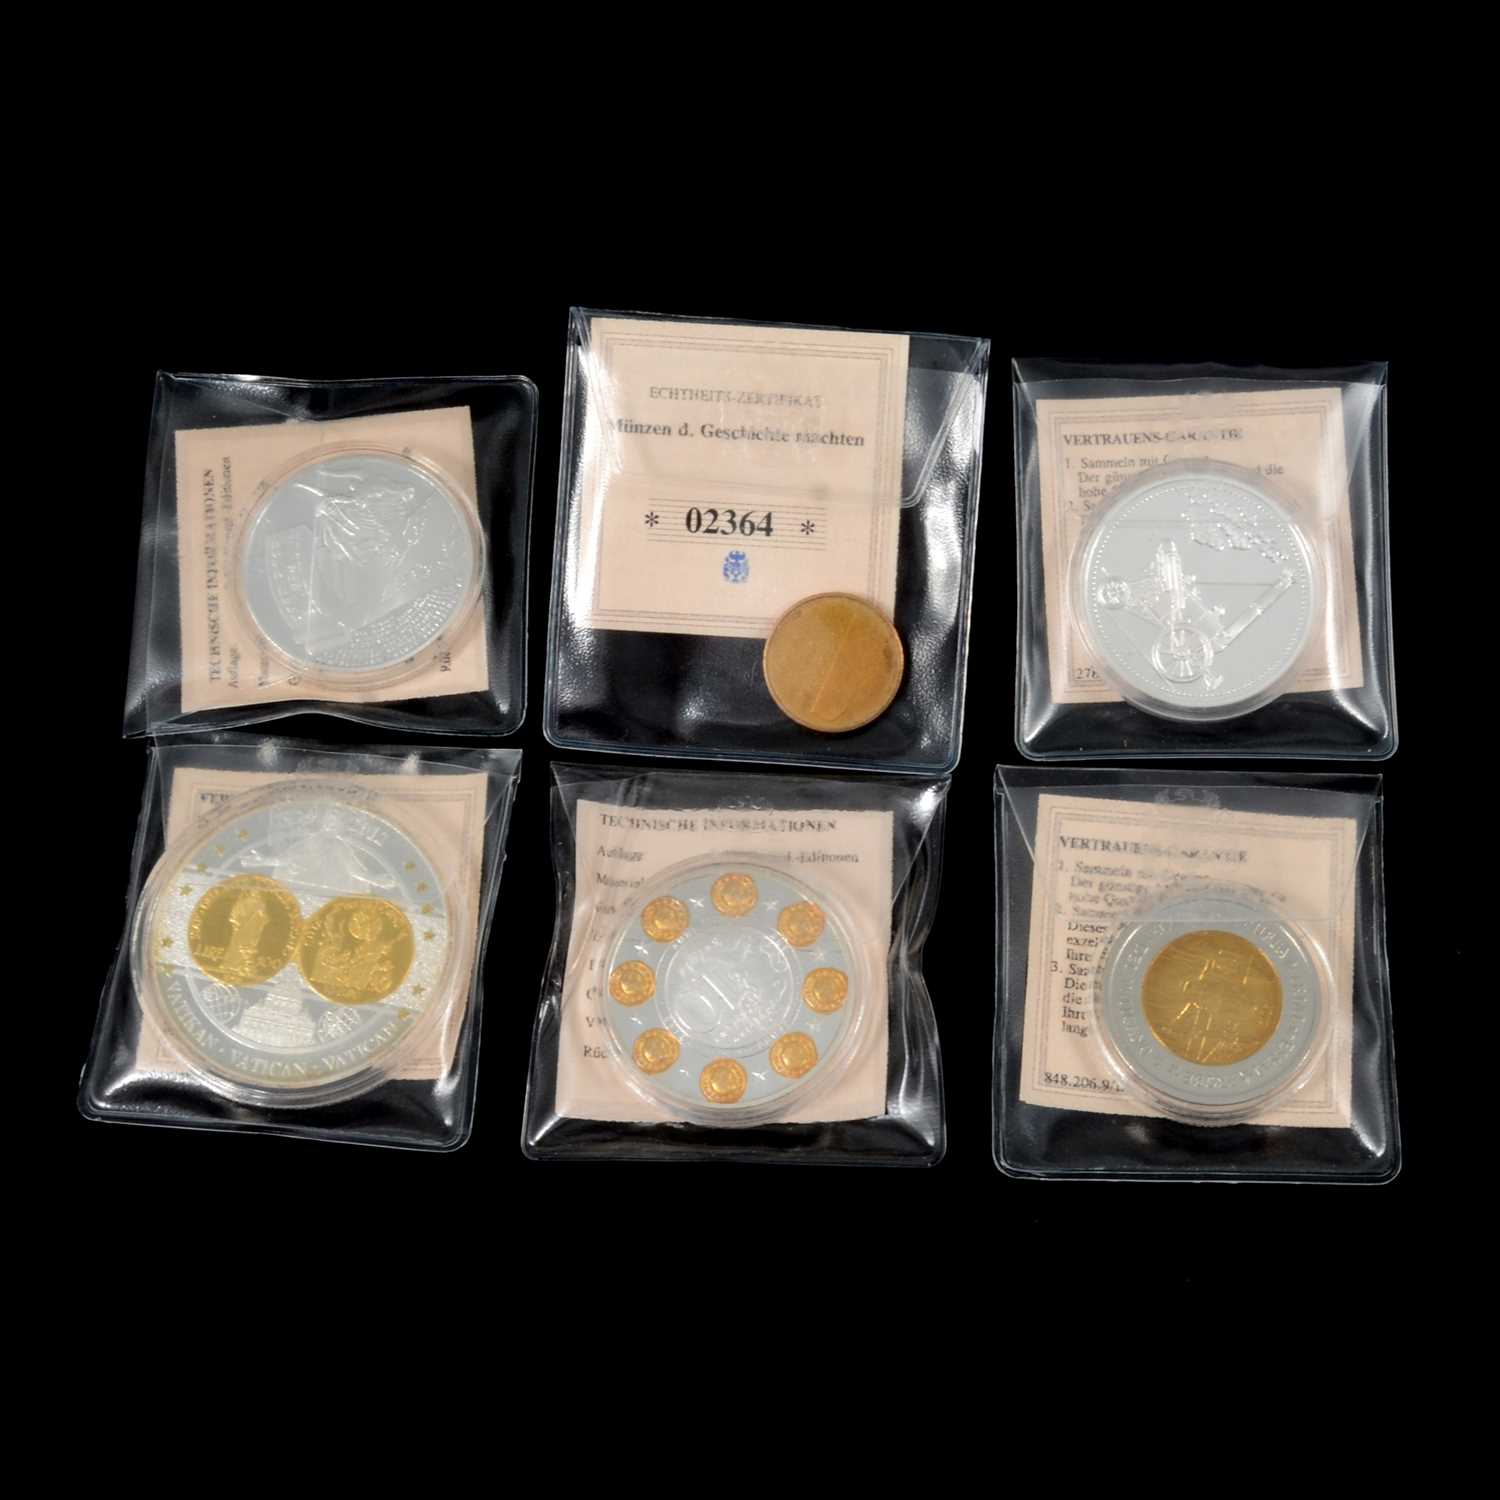 Lot 177 - Collection of gold-plated and silver-plated European commemorative proof coins.